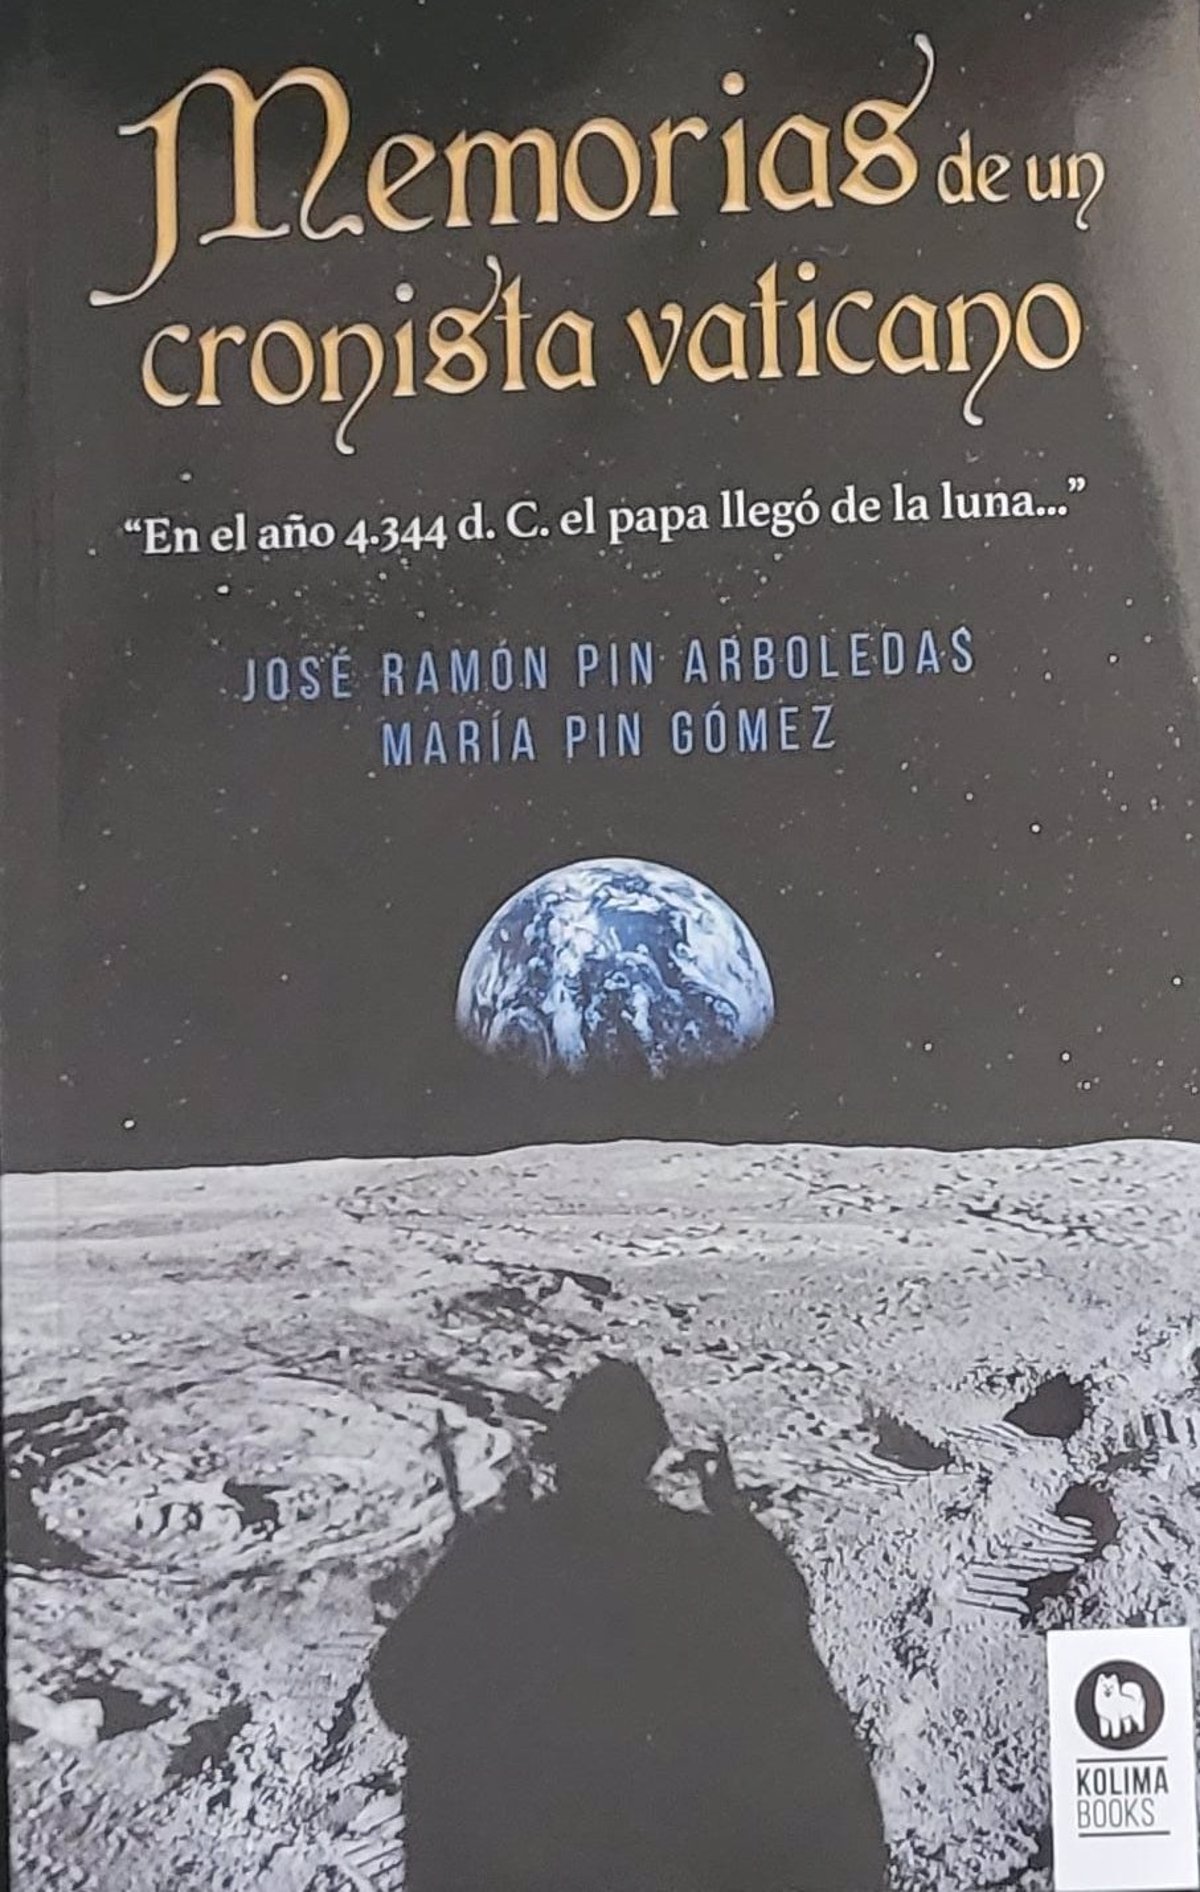 The book ‘Memories of a Vatican chronicler’, by José Ramón and María Pin, imagines a Pope arriving from the Moon in 4.344